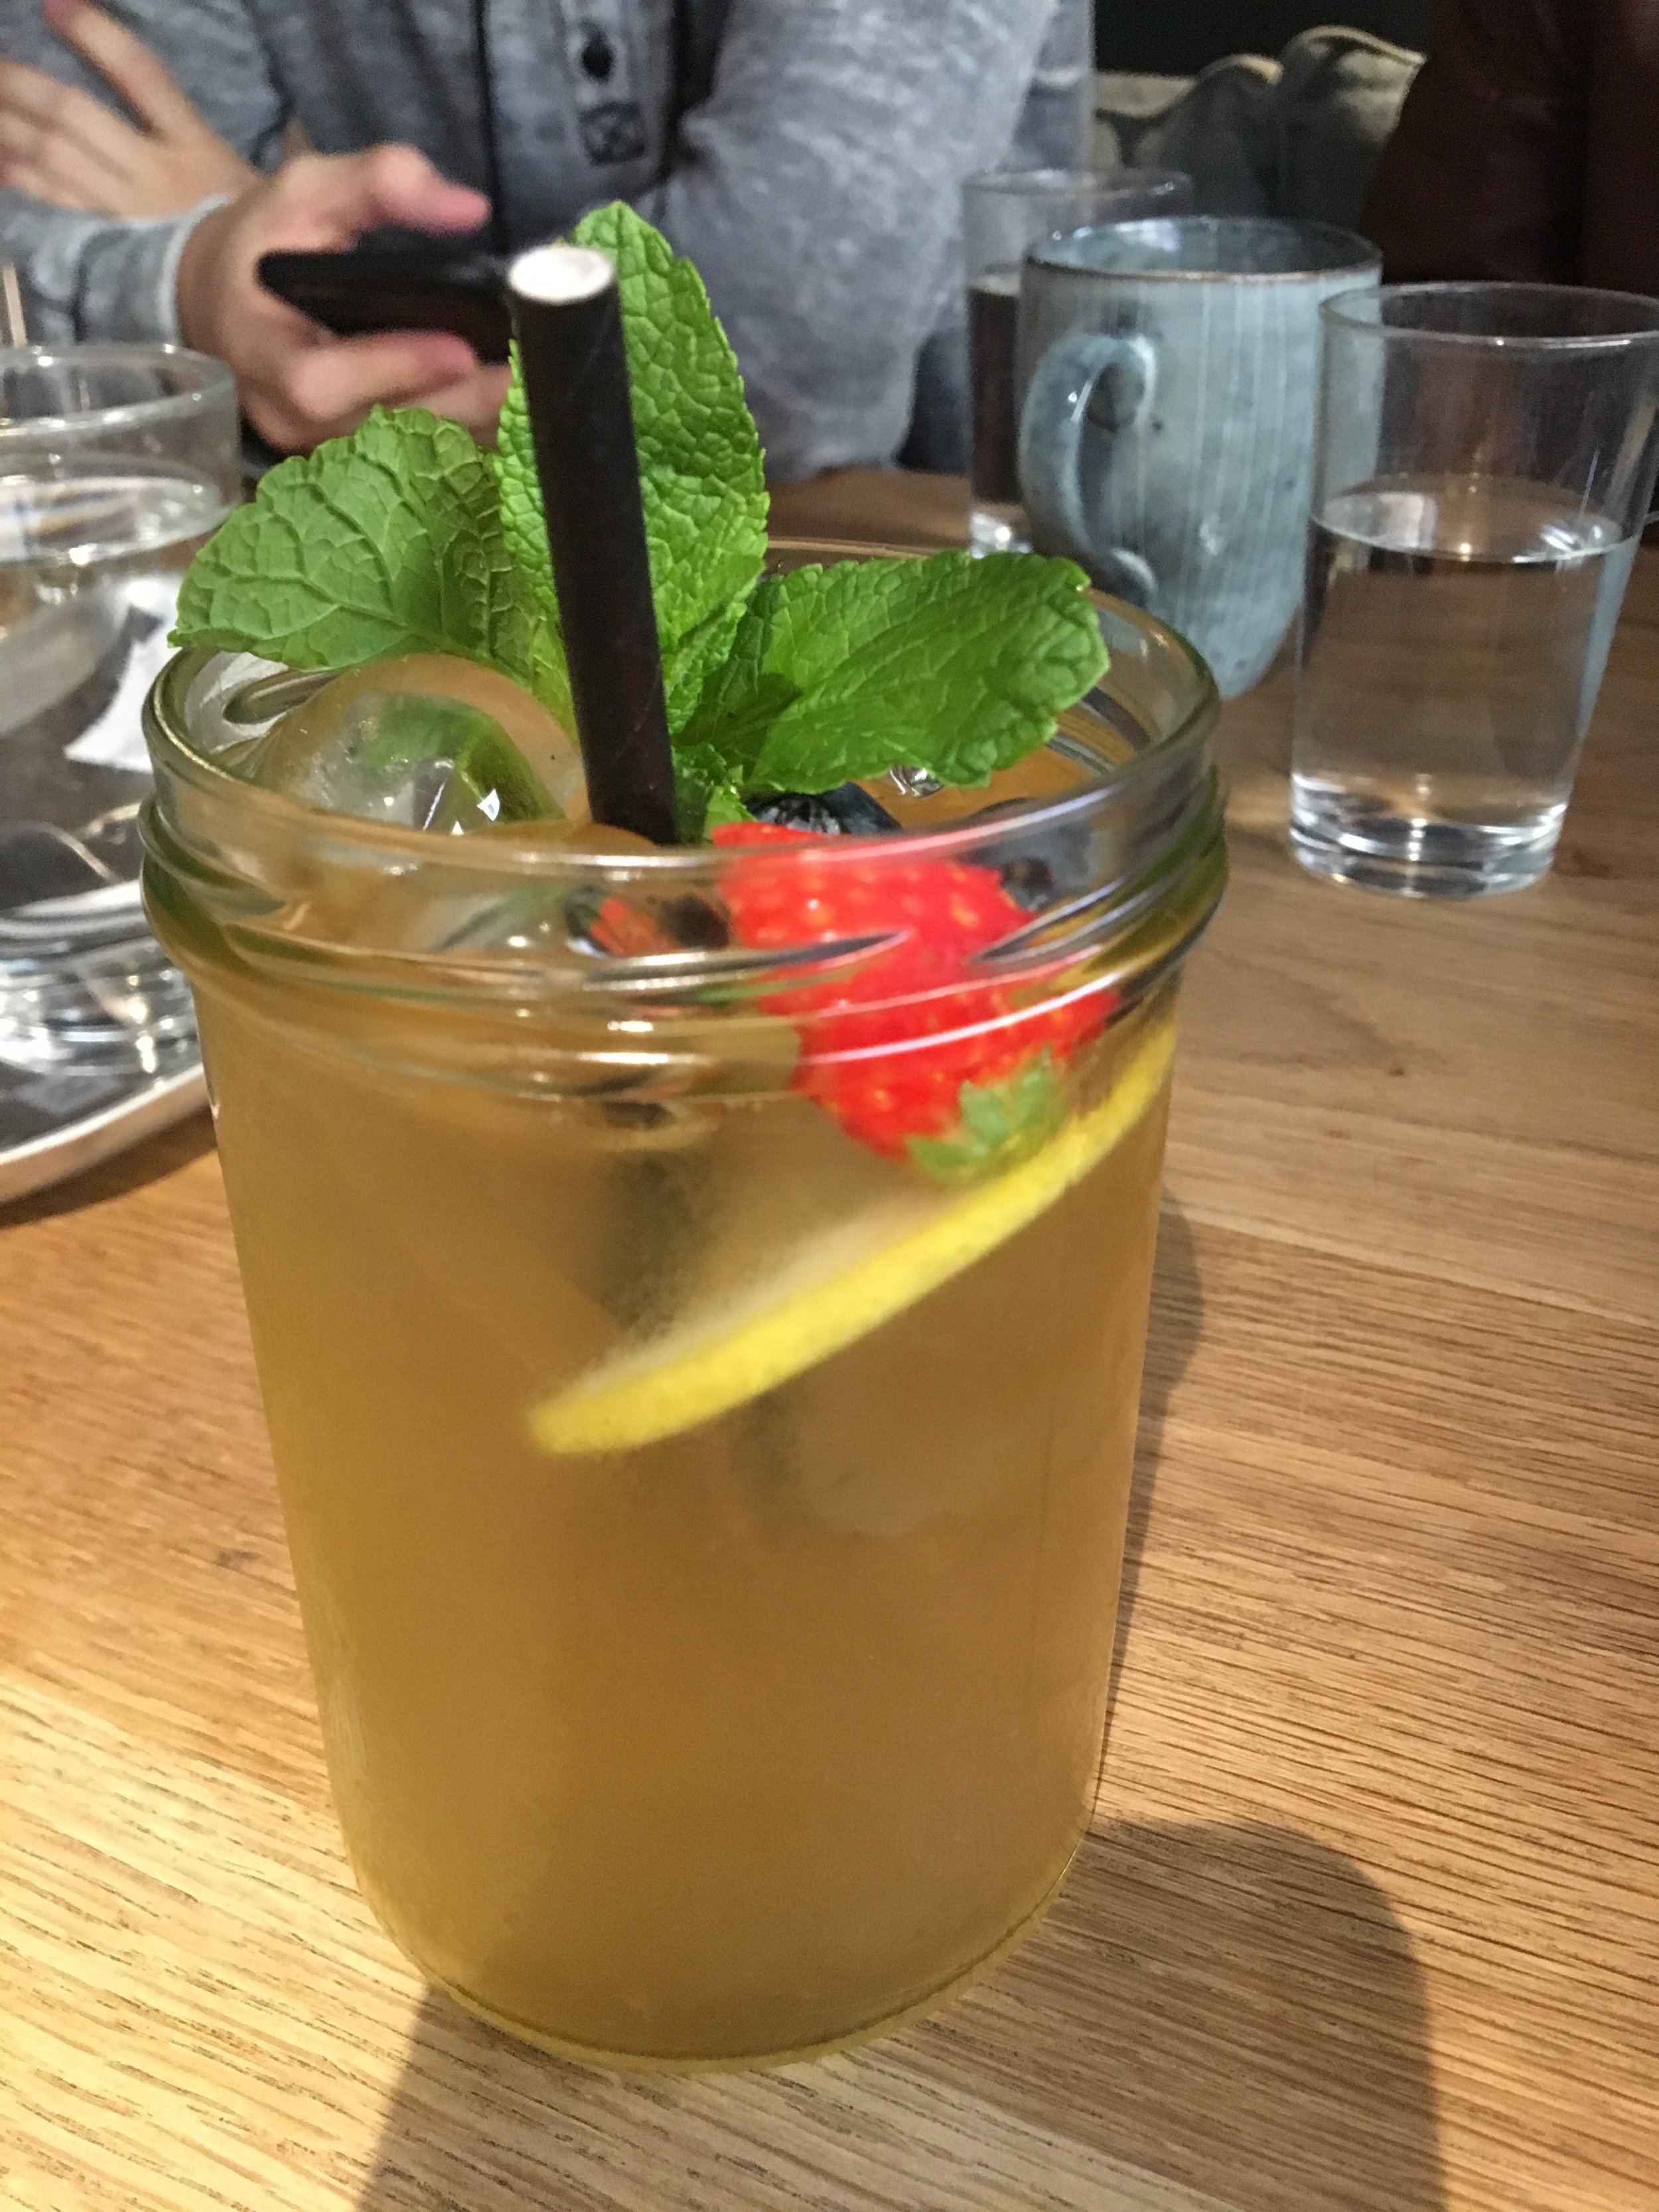 When you ask for iced tea in Stockholm - this isn't iced tea but it's interesting.